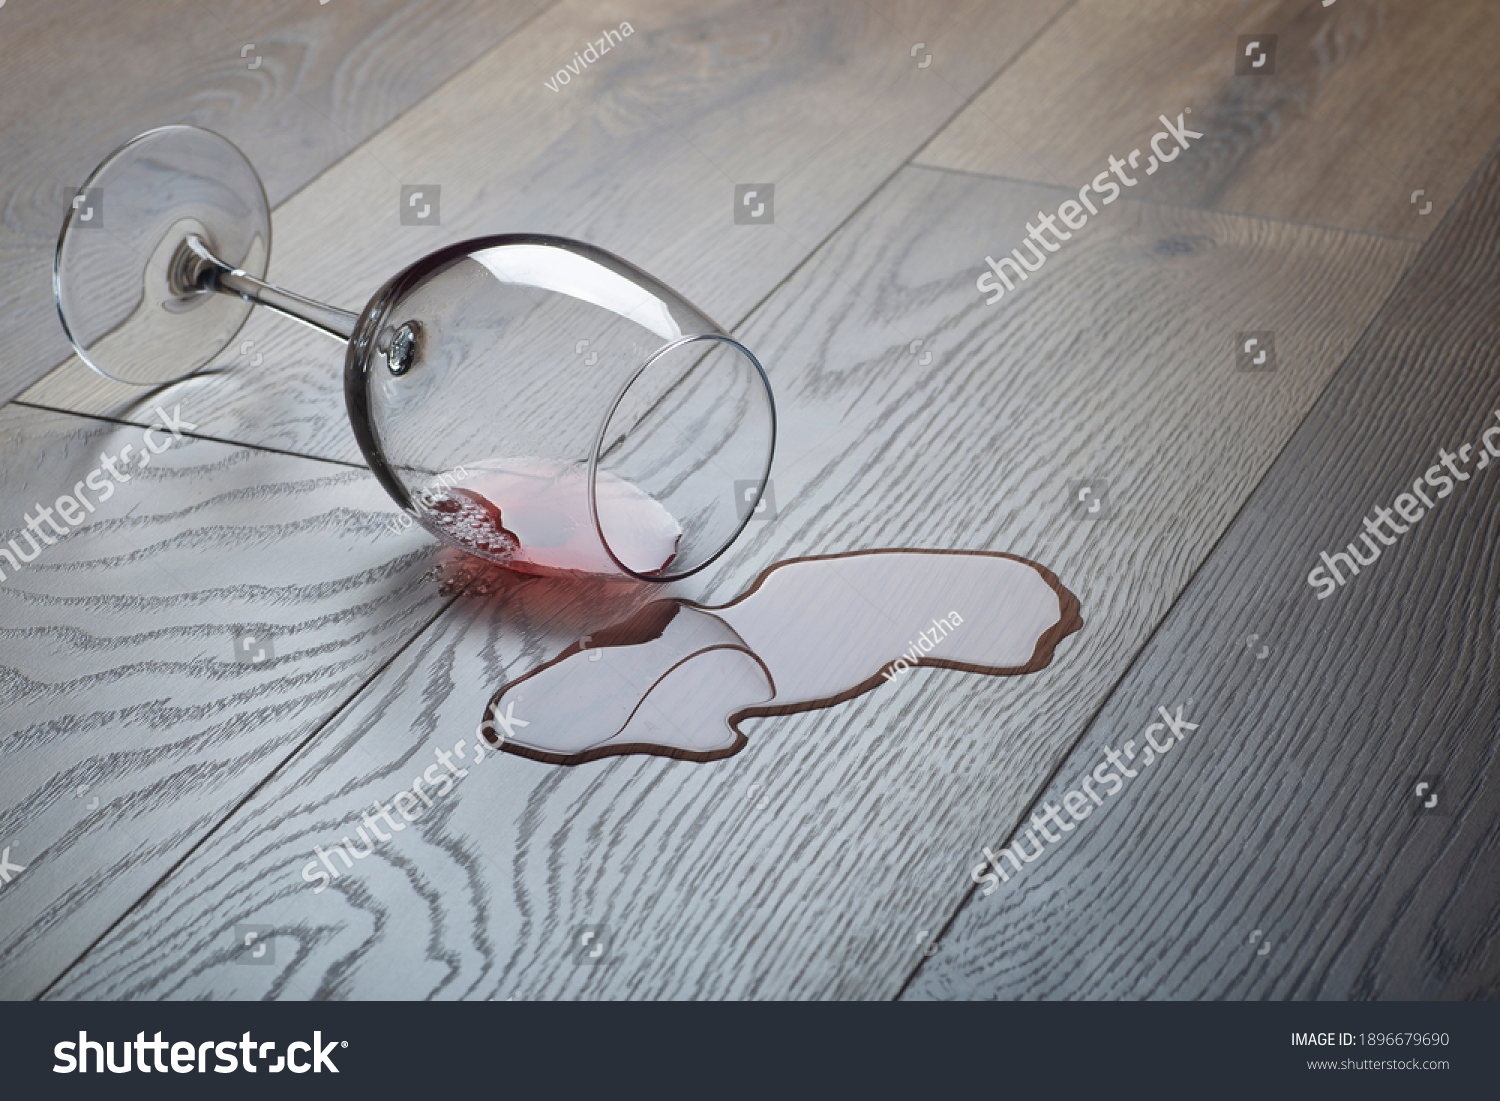 Wooden floor with overturned glass of red wine. Spilled wine on a wooden laminate (parquet) floor with moisture protection. Concept of alcoholism, broken relationships, depression #1896679690